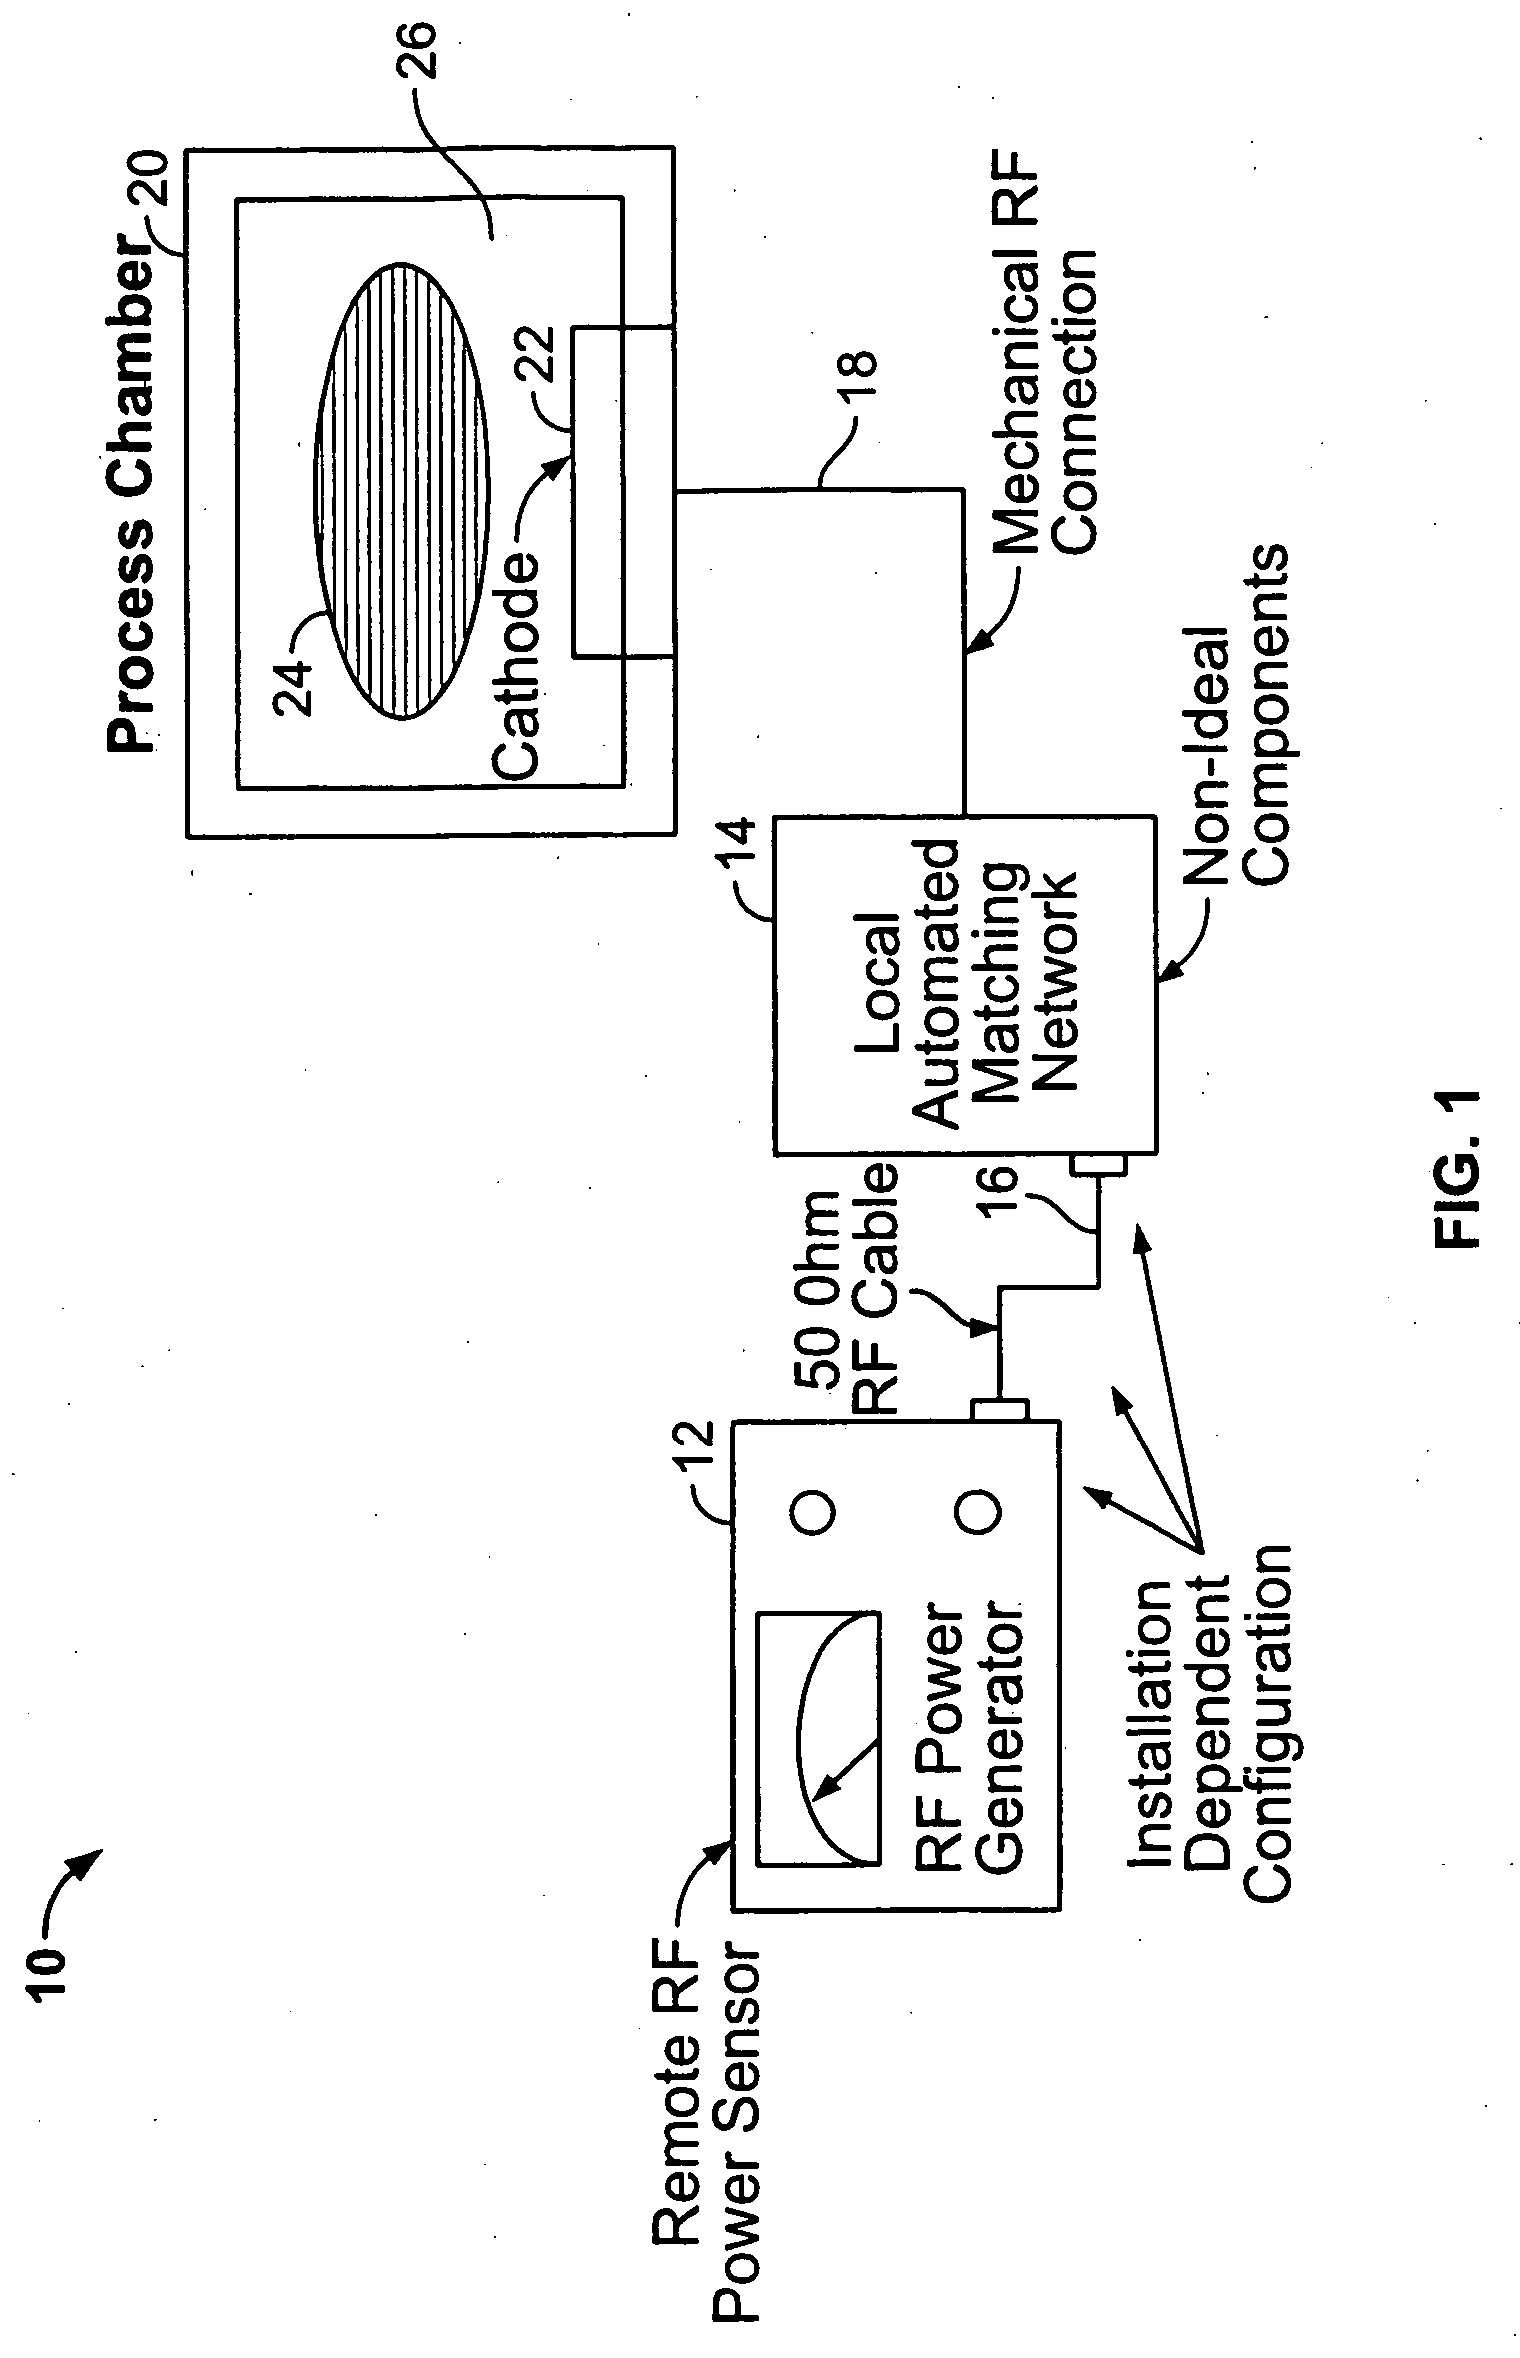 Method for toolmatching and troubleshooting a plasma processing system